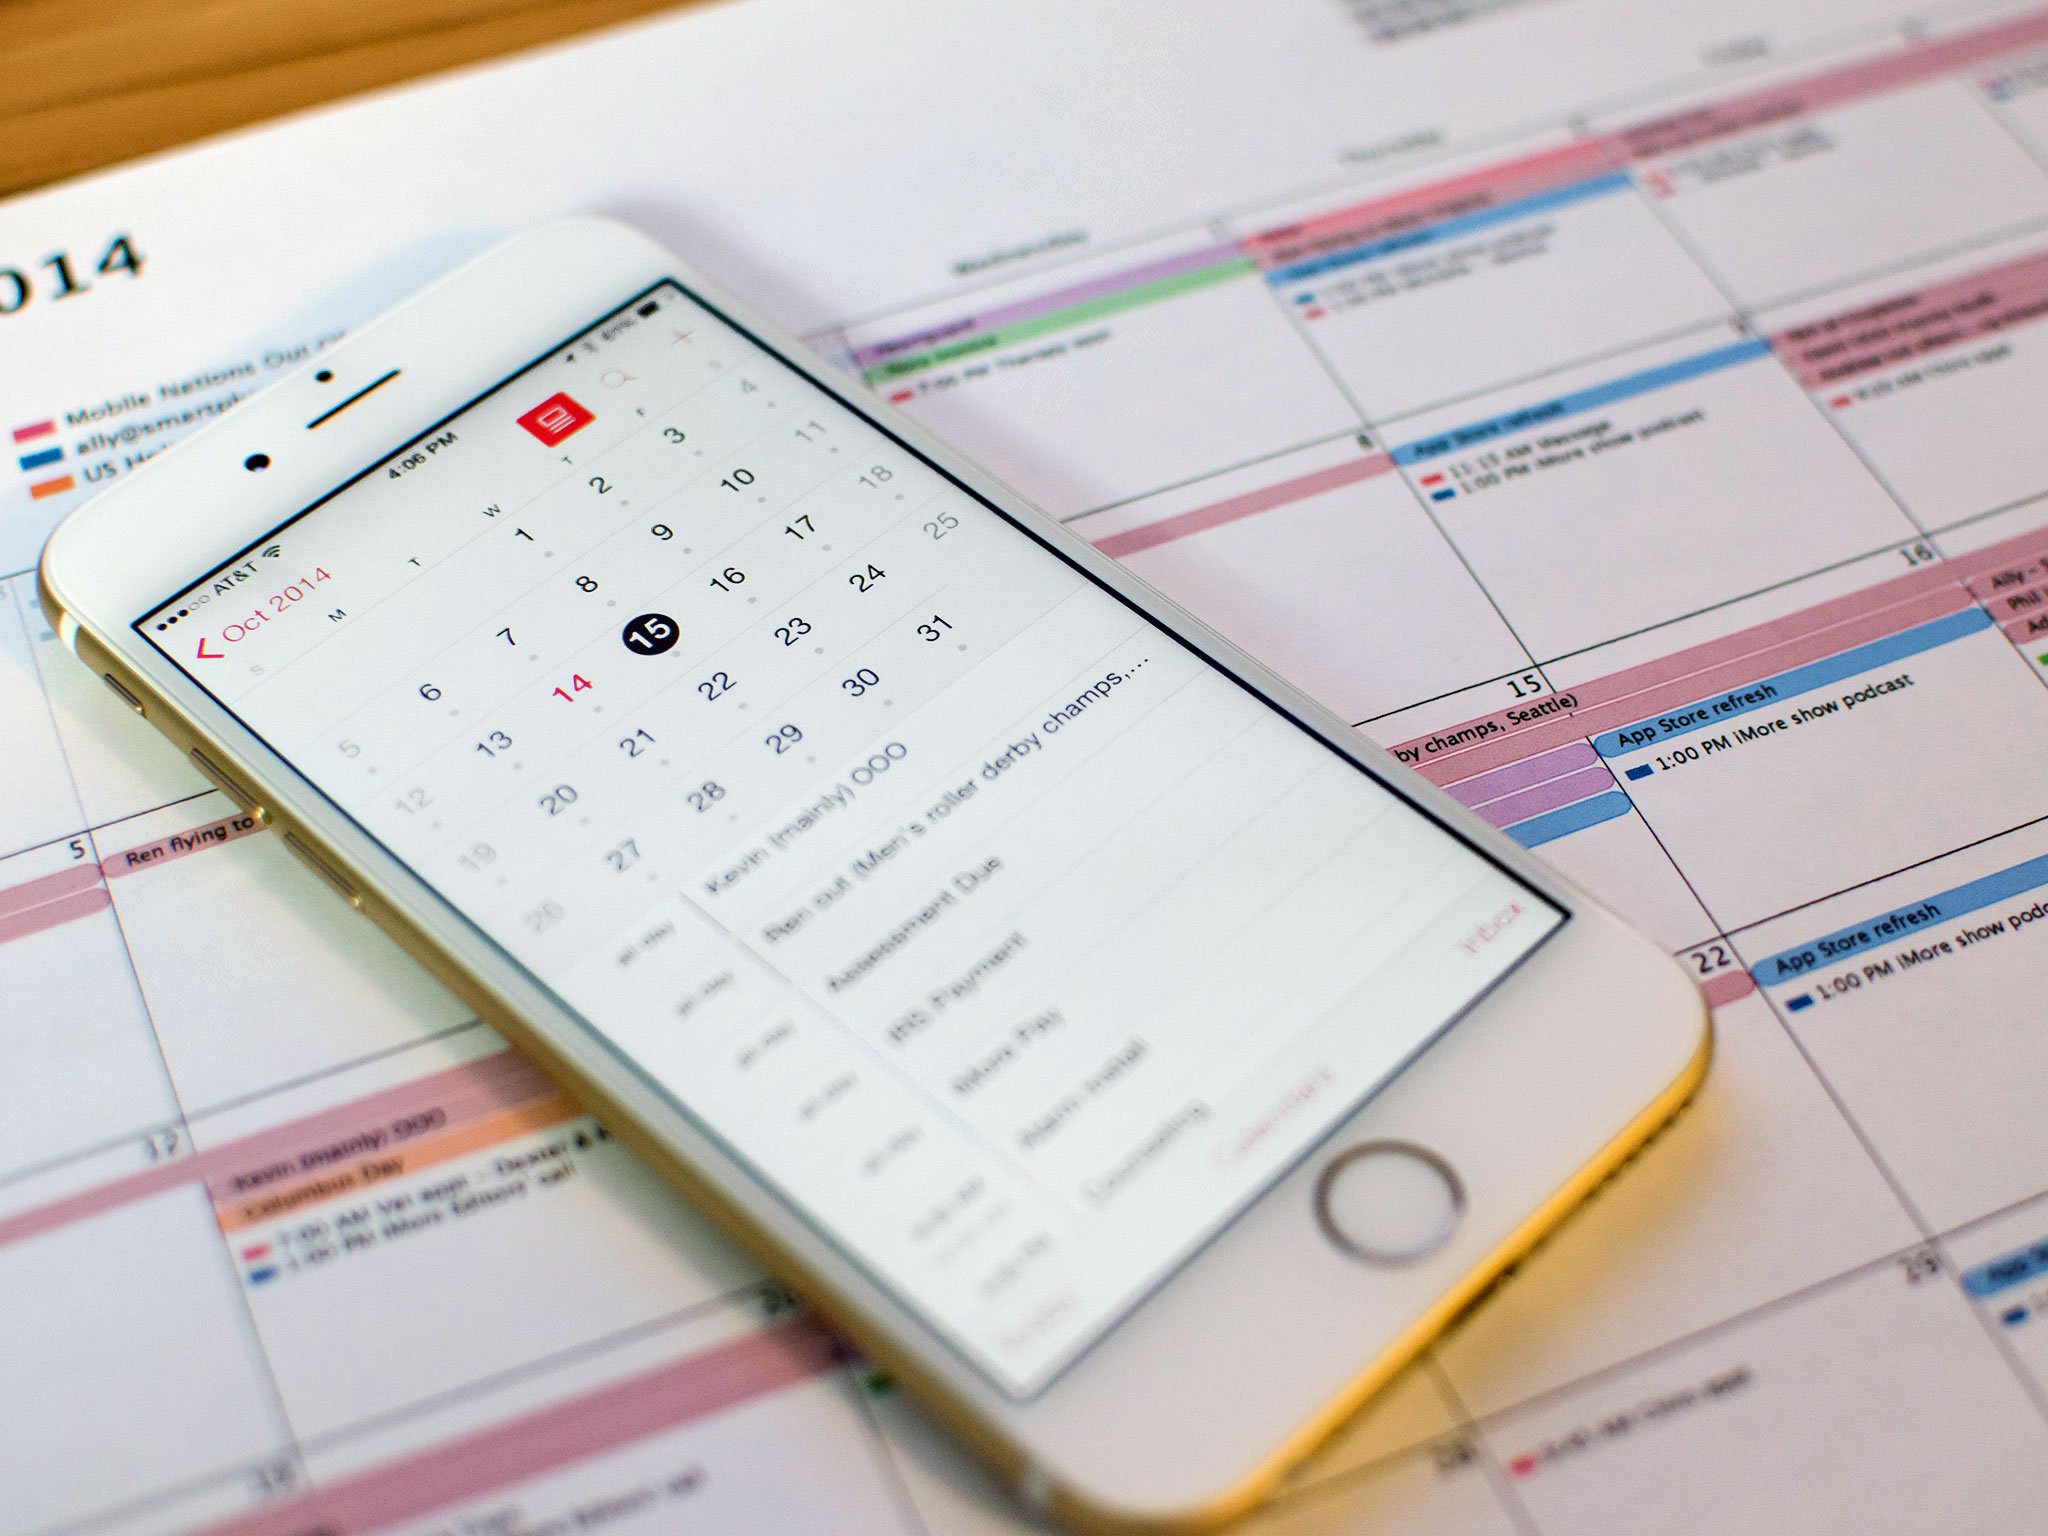 How to add and manage calendar events on iPhone and iPad iMore